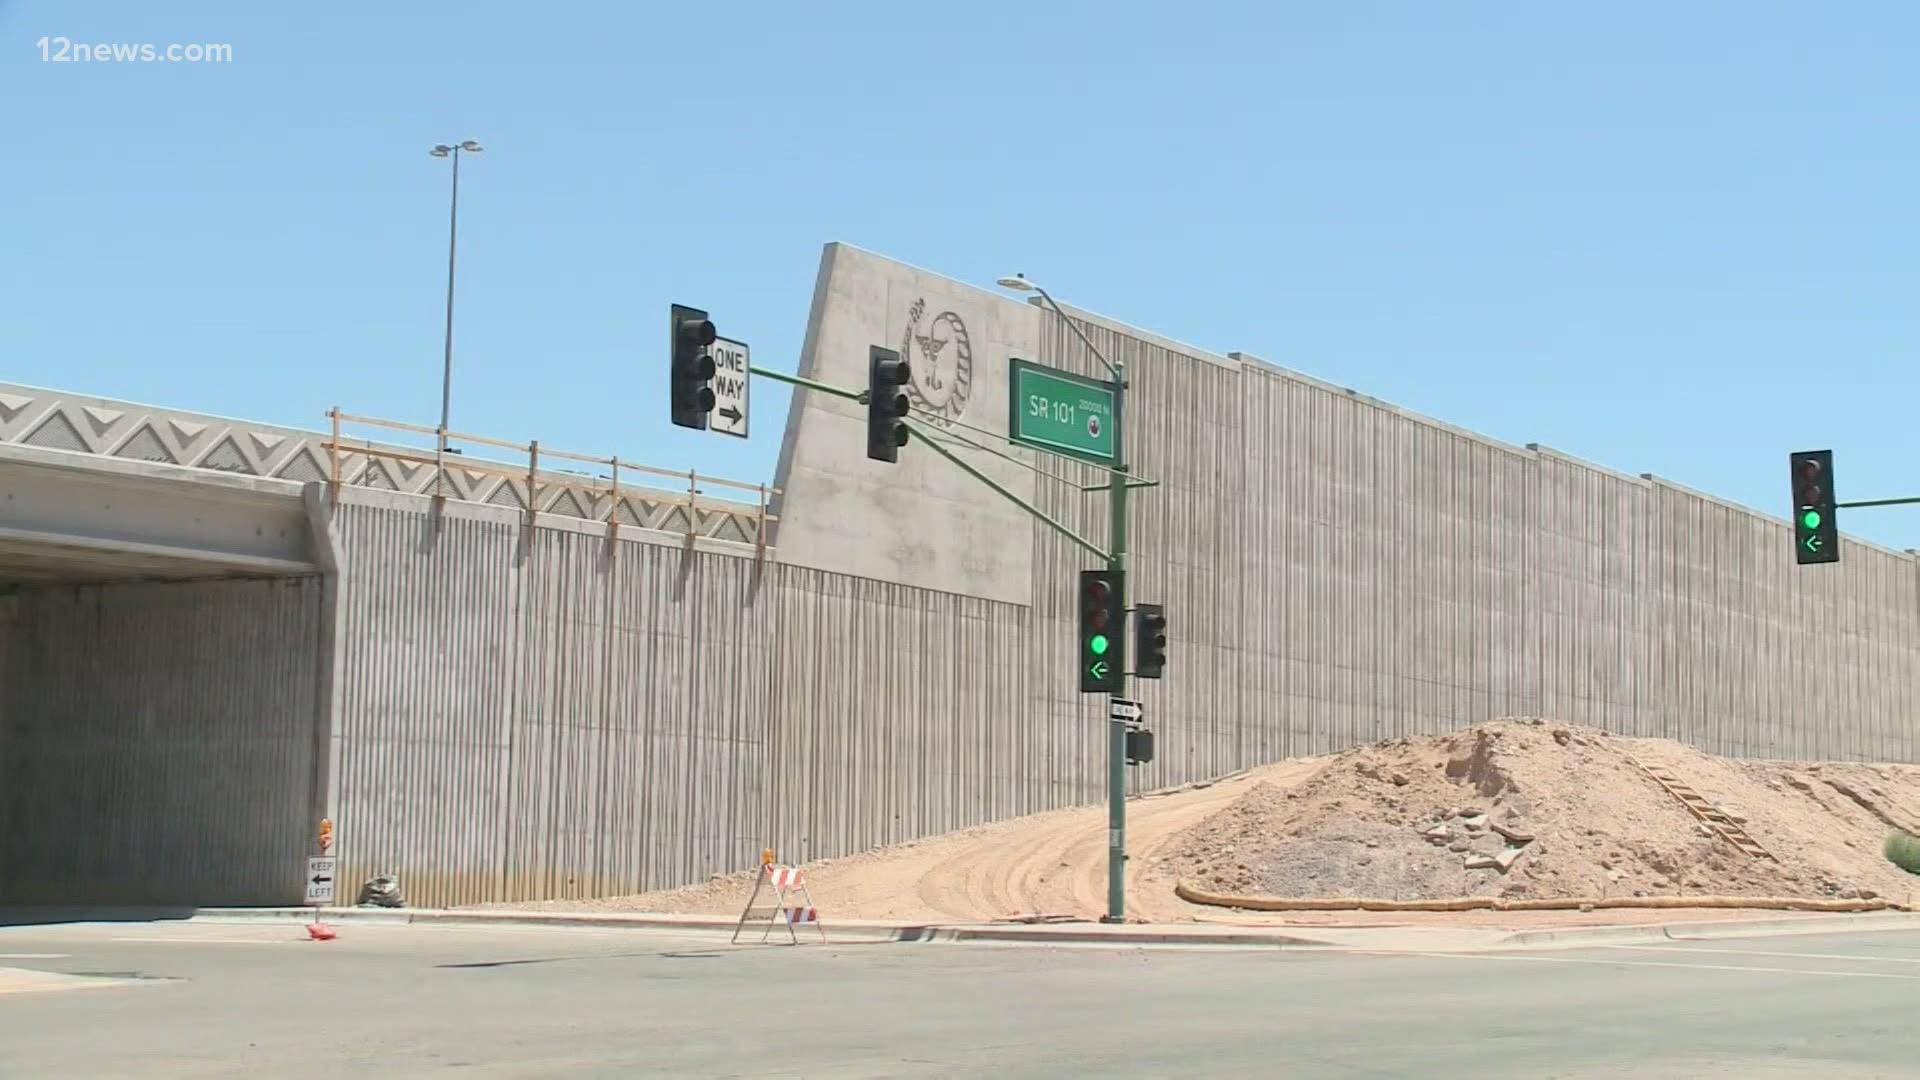 ADOT will hold a virtual meeting to discuss sound wall installations off Loop 101 and 16th Street. One resident says ADOT misplaced the construction of the walls.